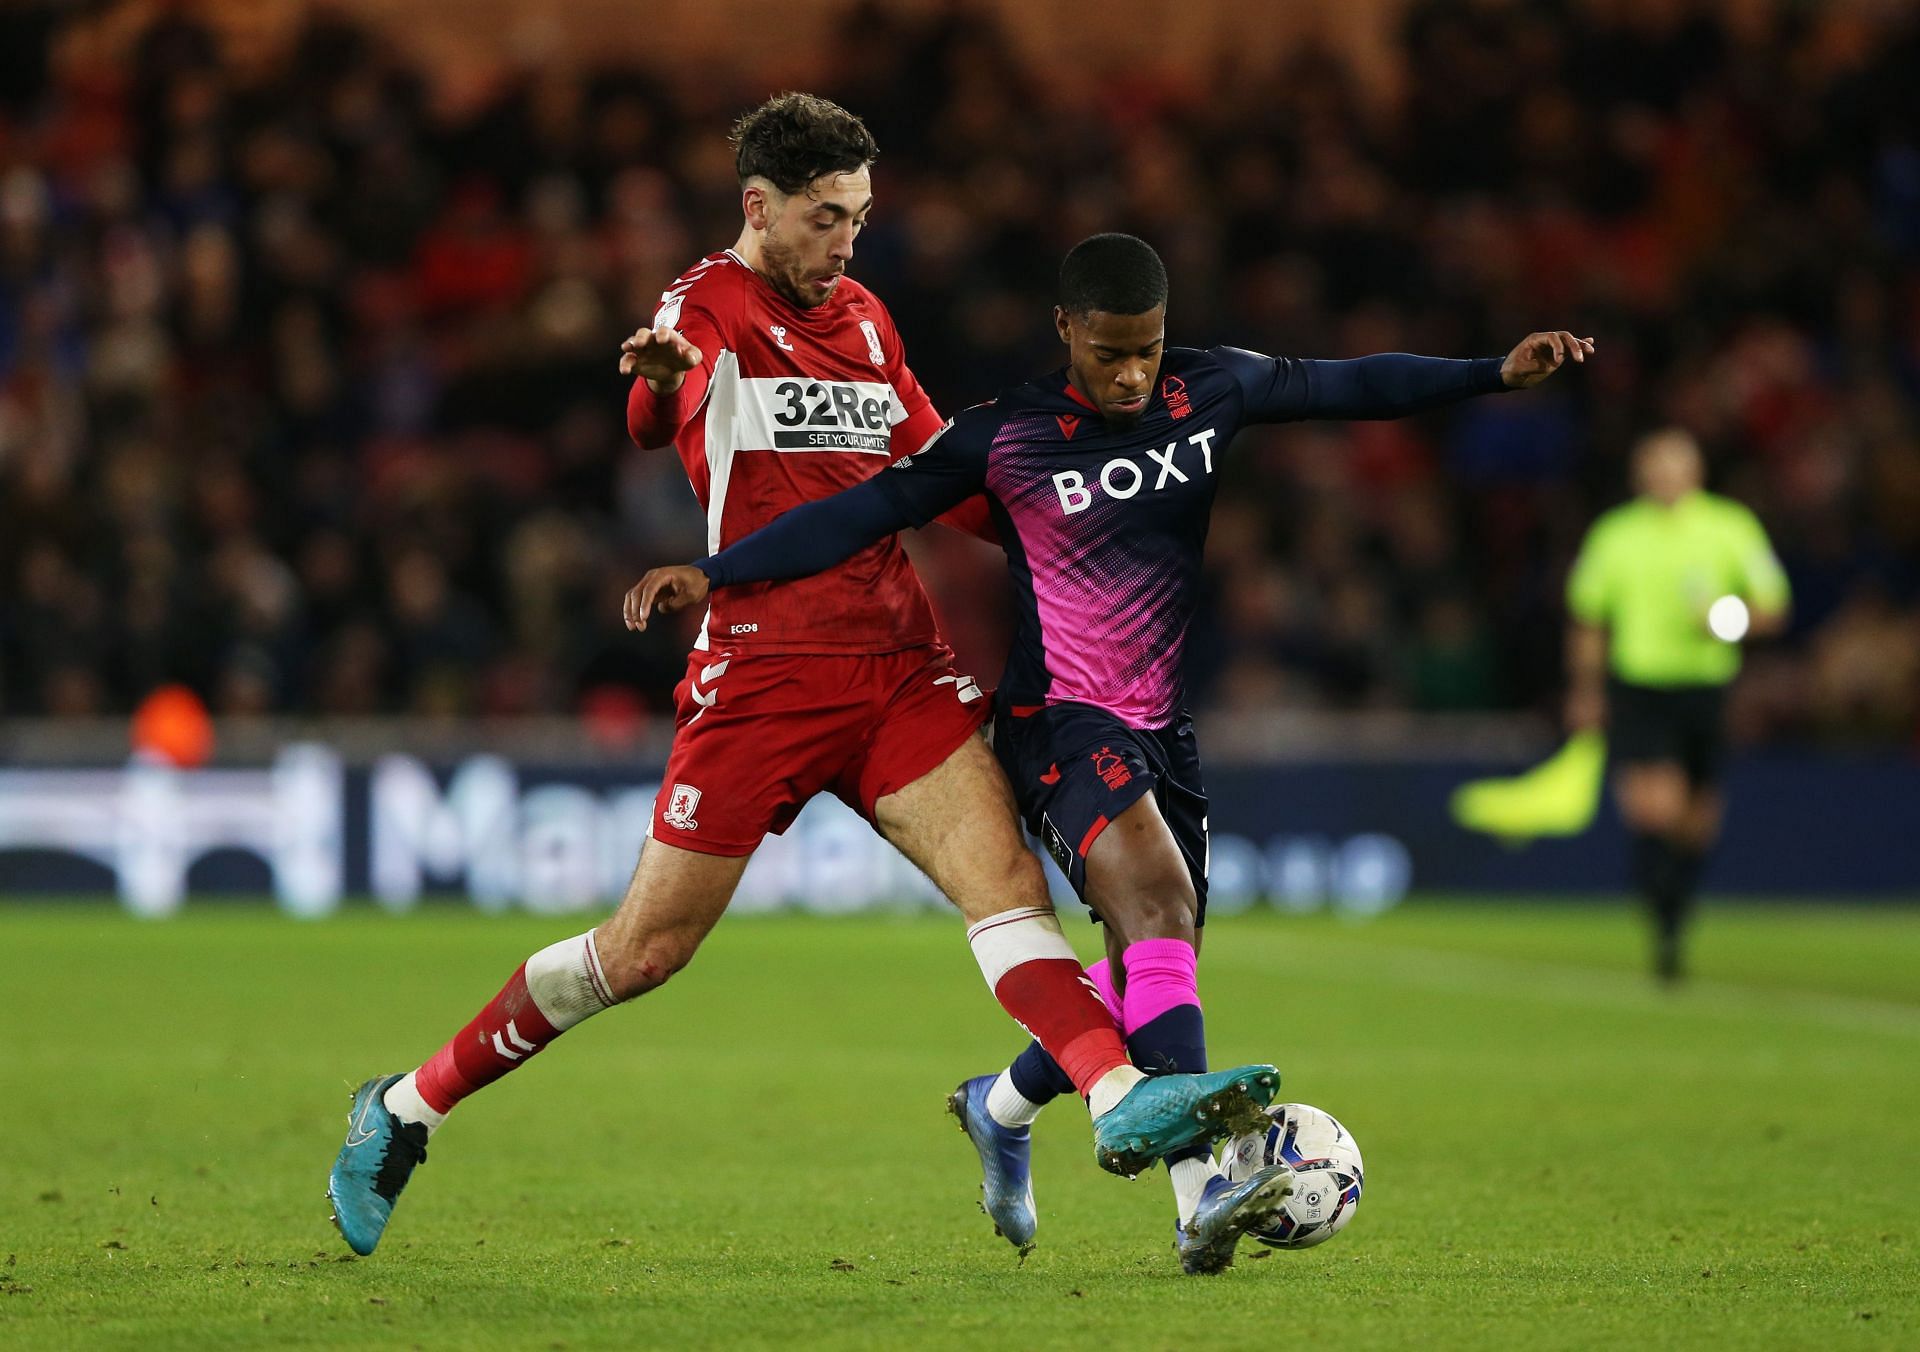 Middlesbrough face Mansfield Town on Saturday